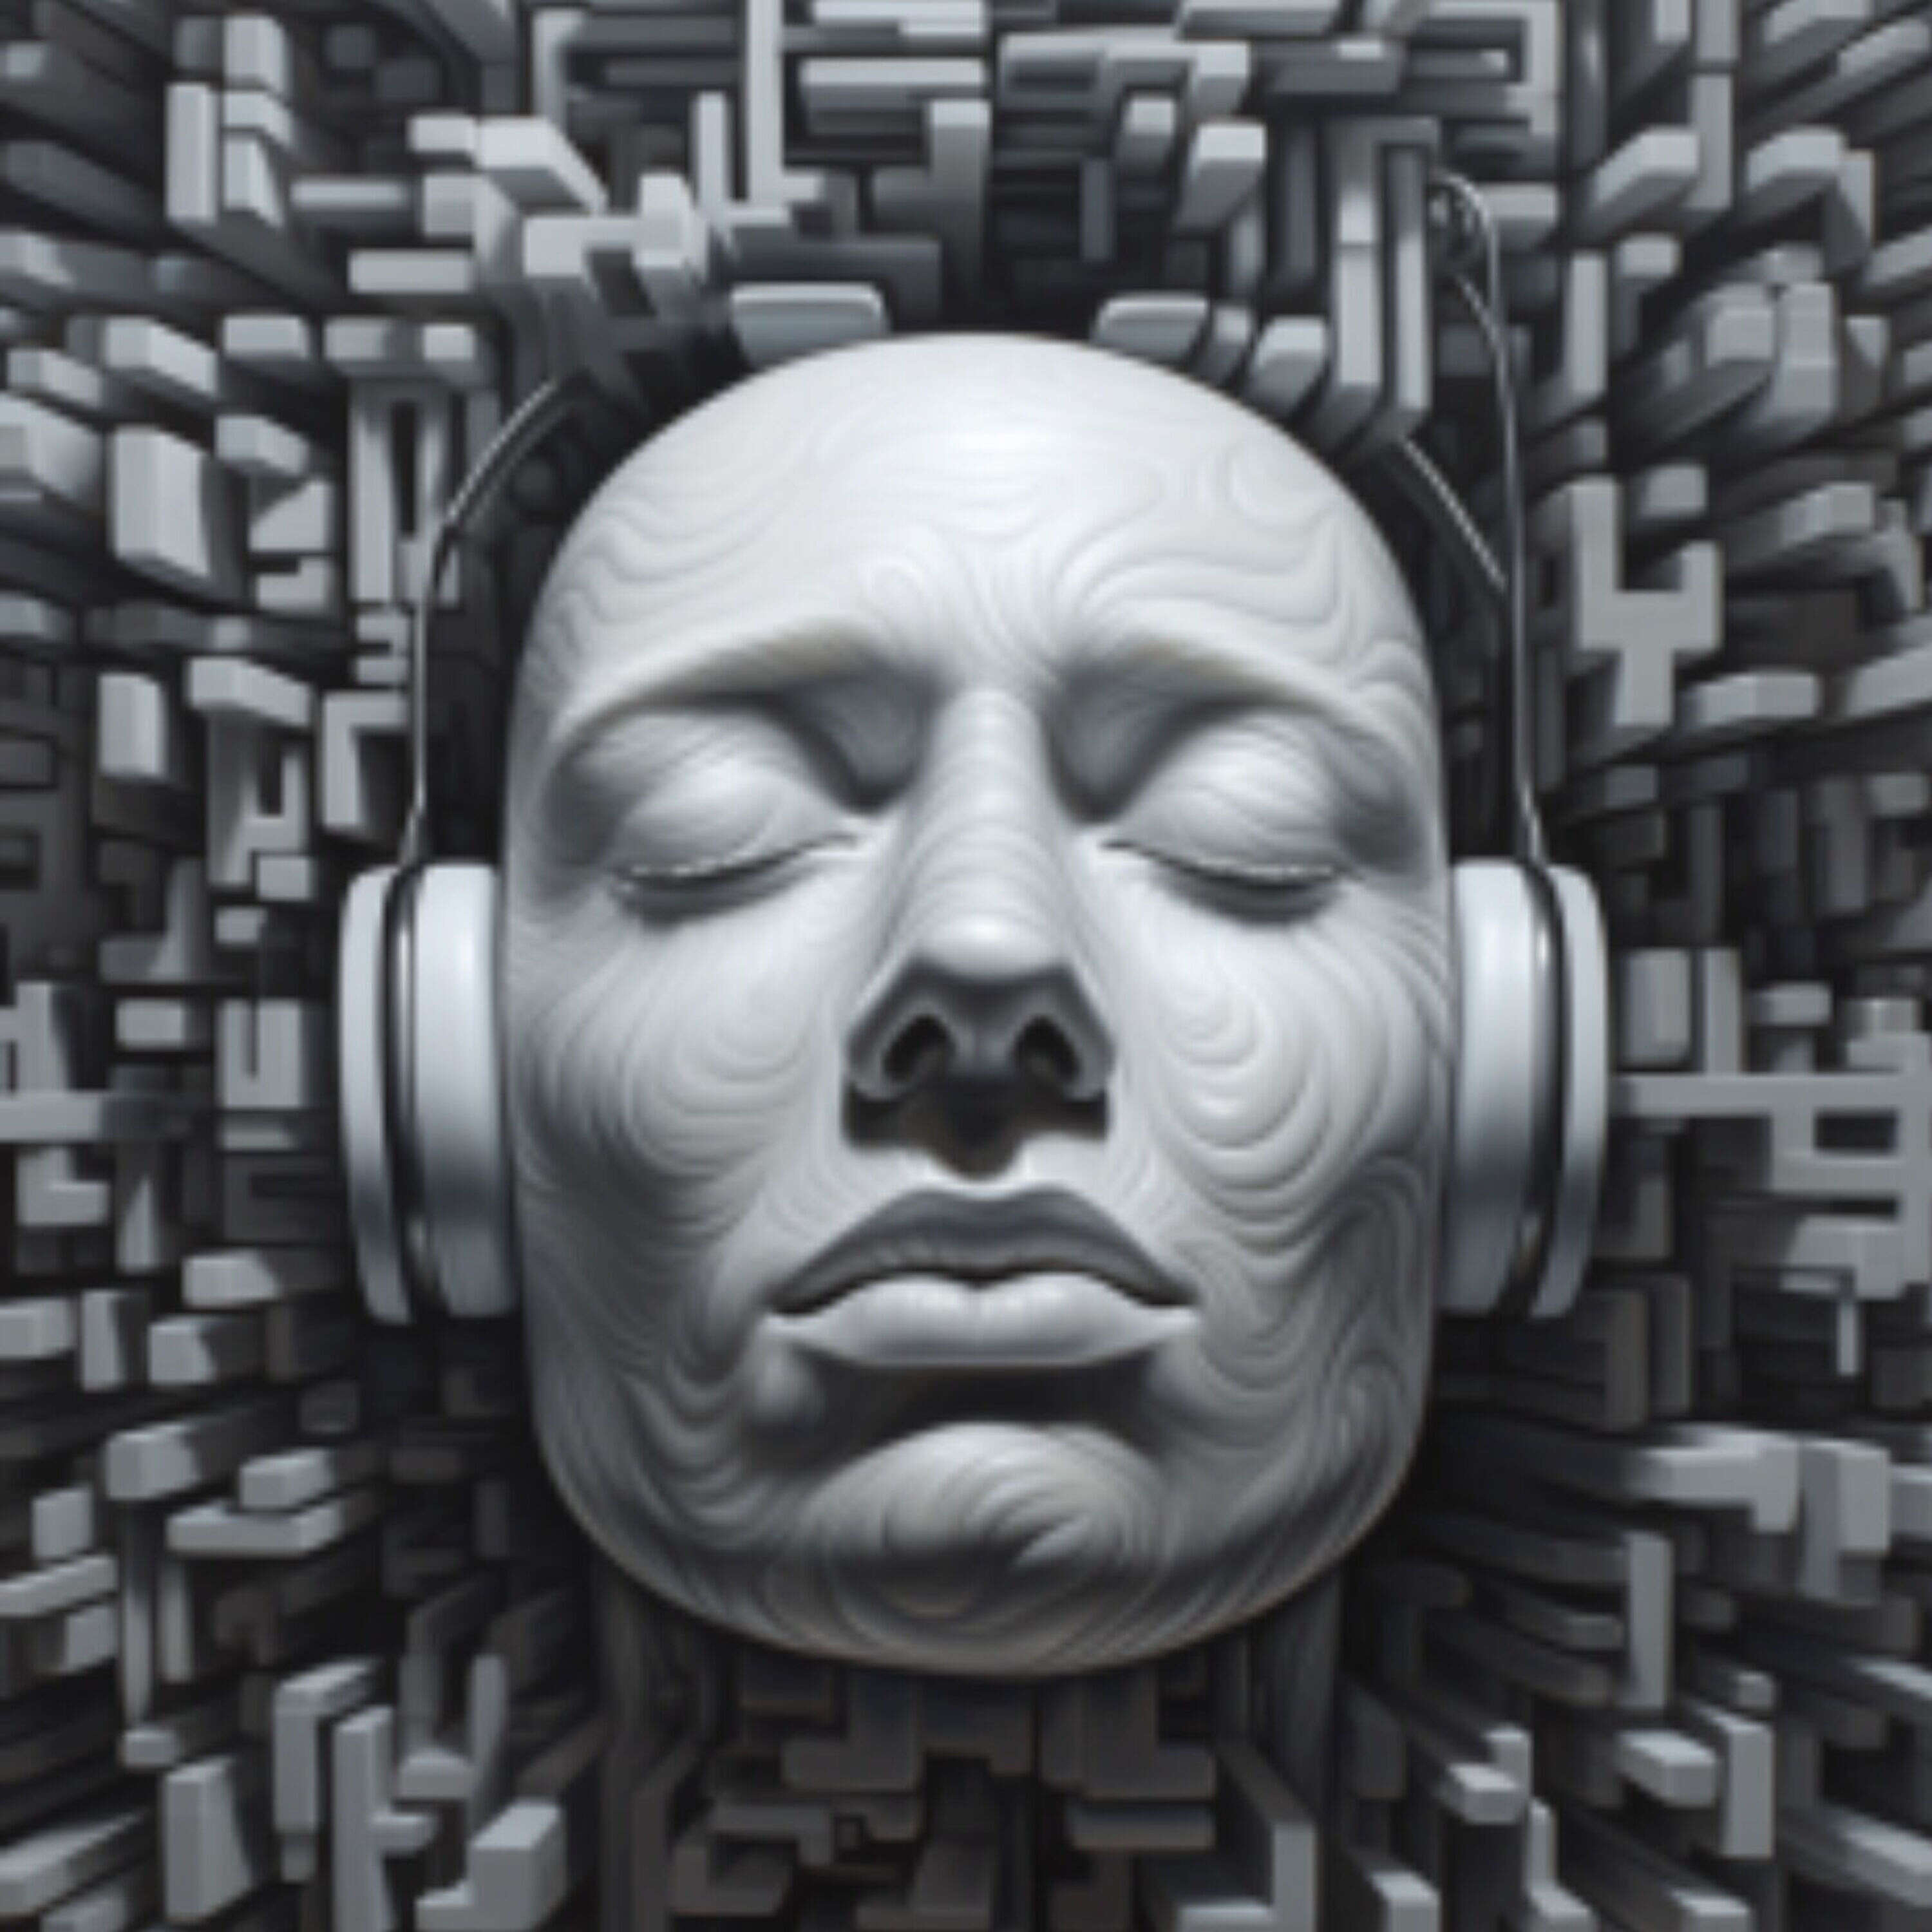 Nighttime Bliss: The Sounds that Lull You into Slumber